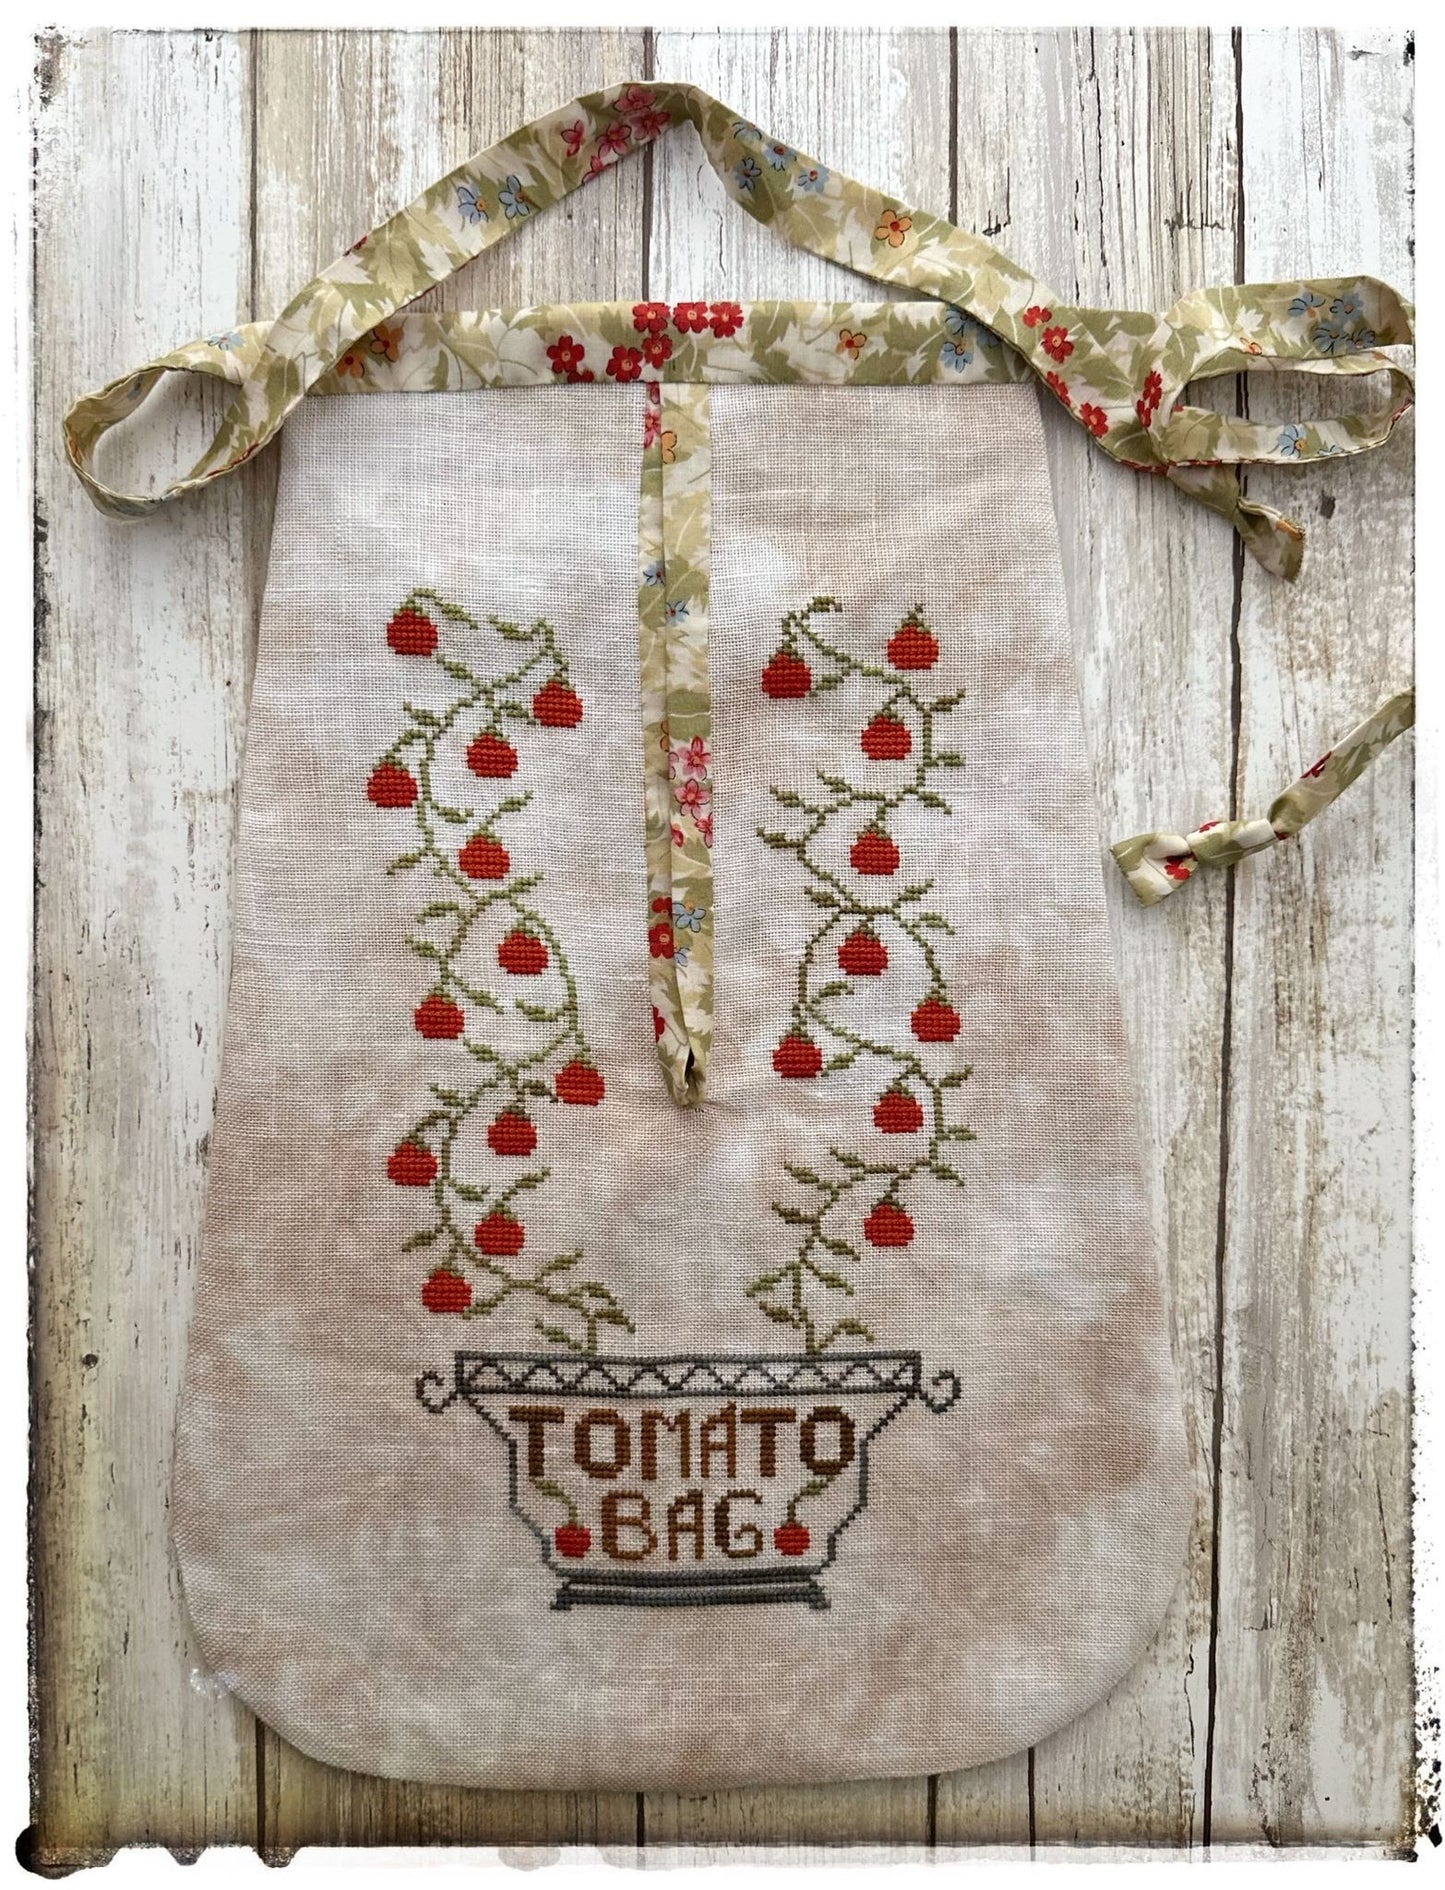 Tomato Bag - Cross Stitch Chart by Lucy Beam PREORDER